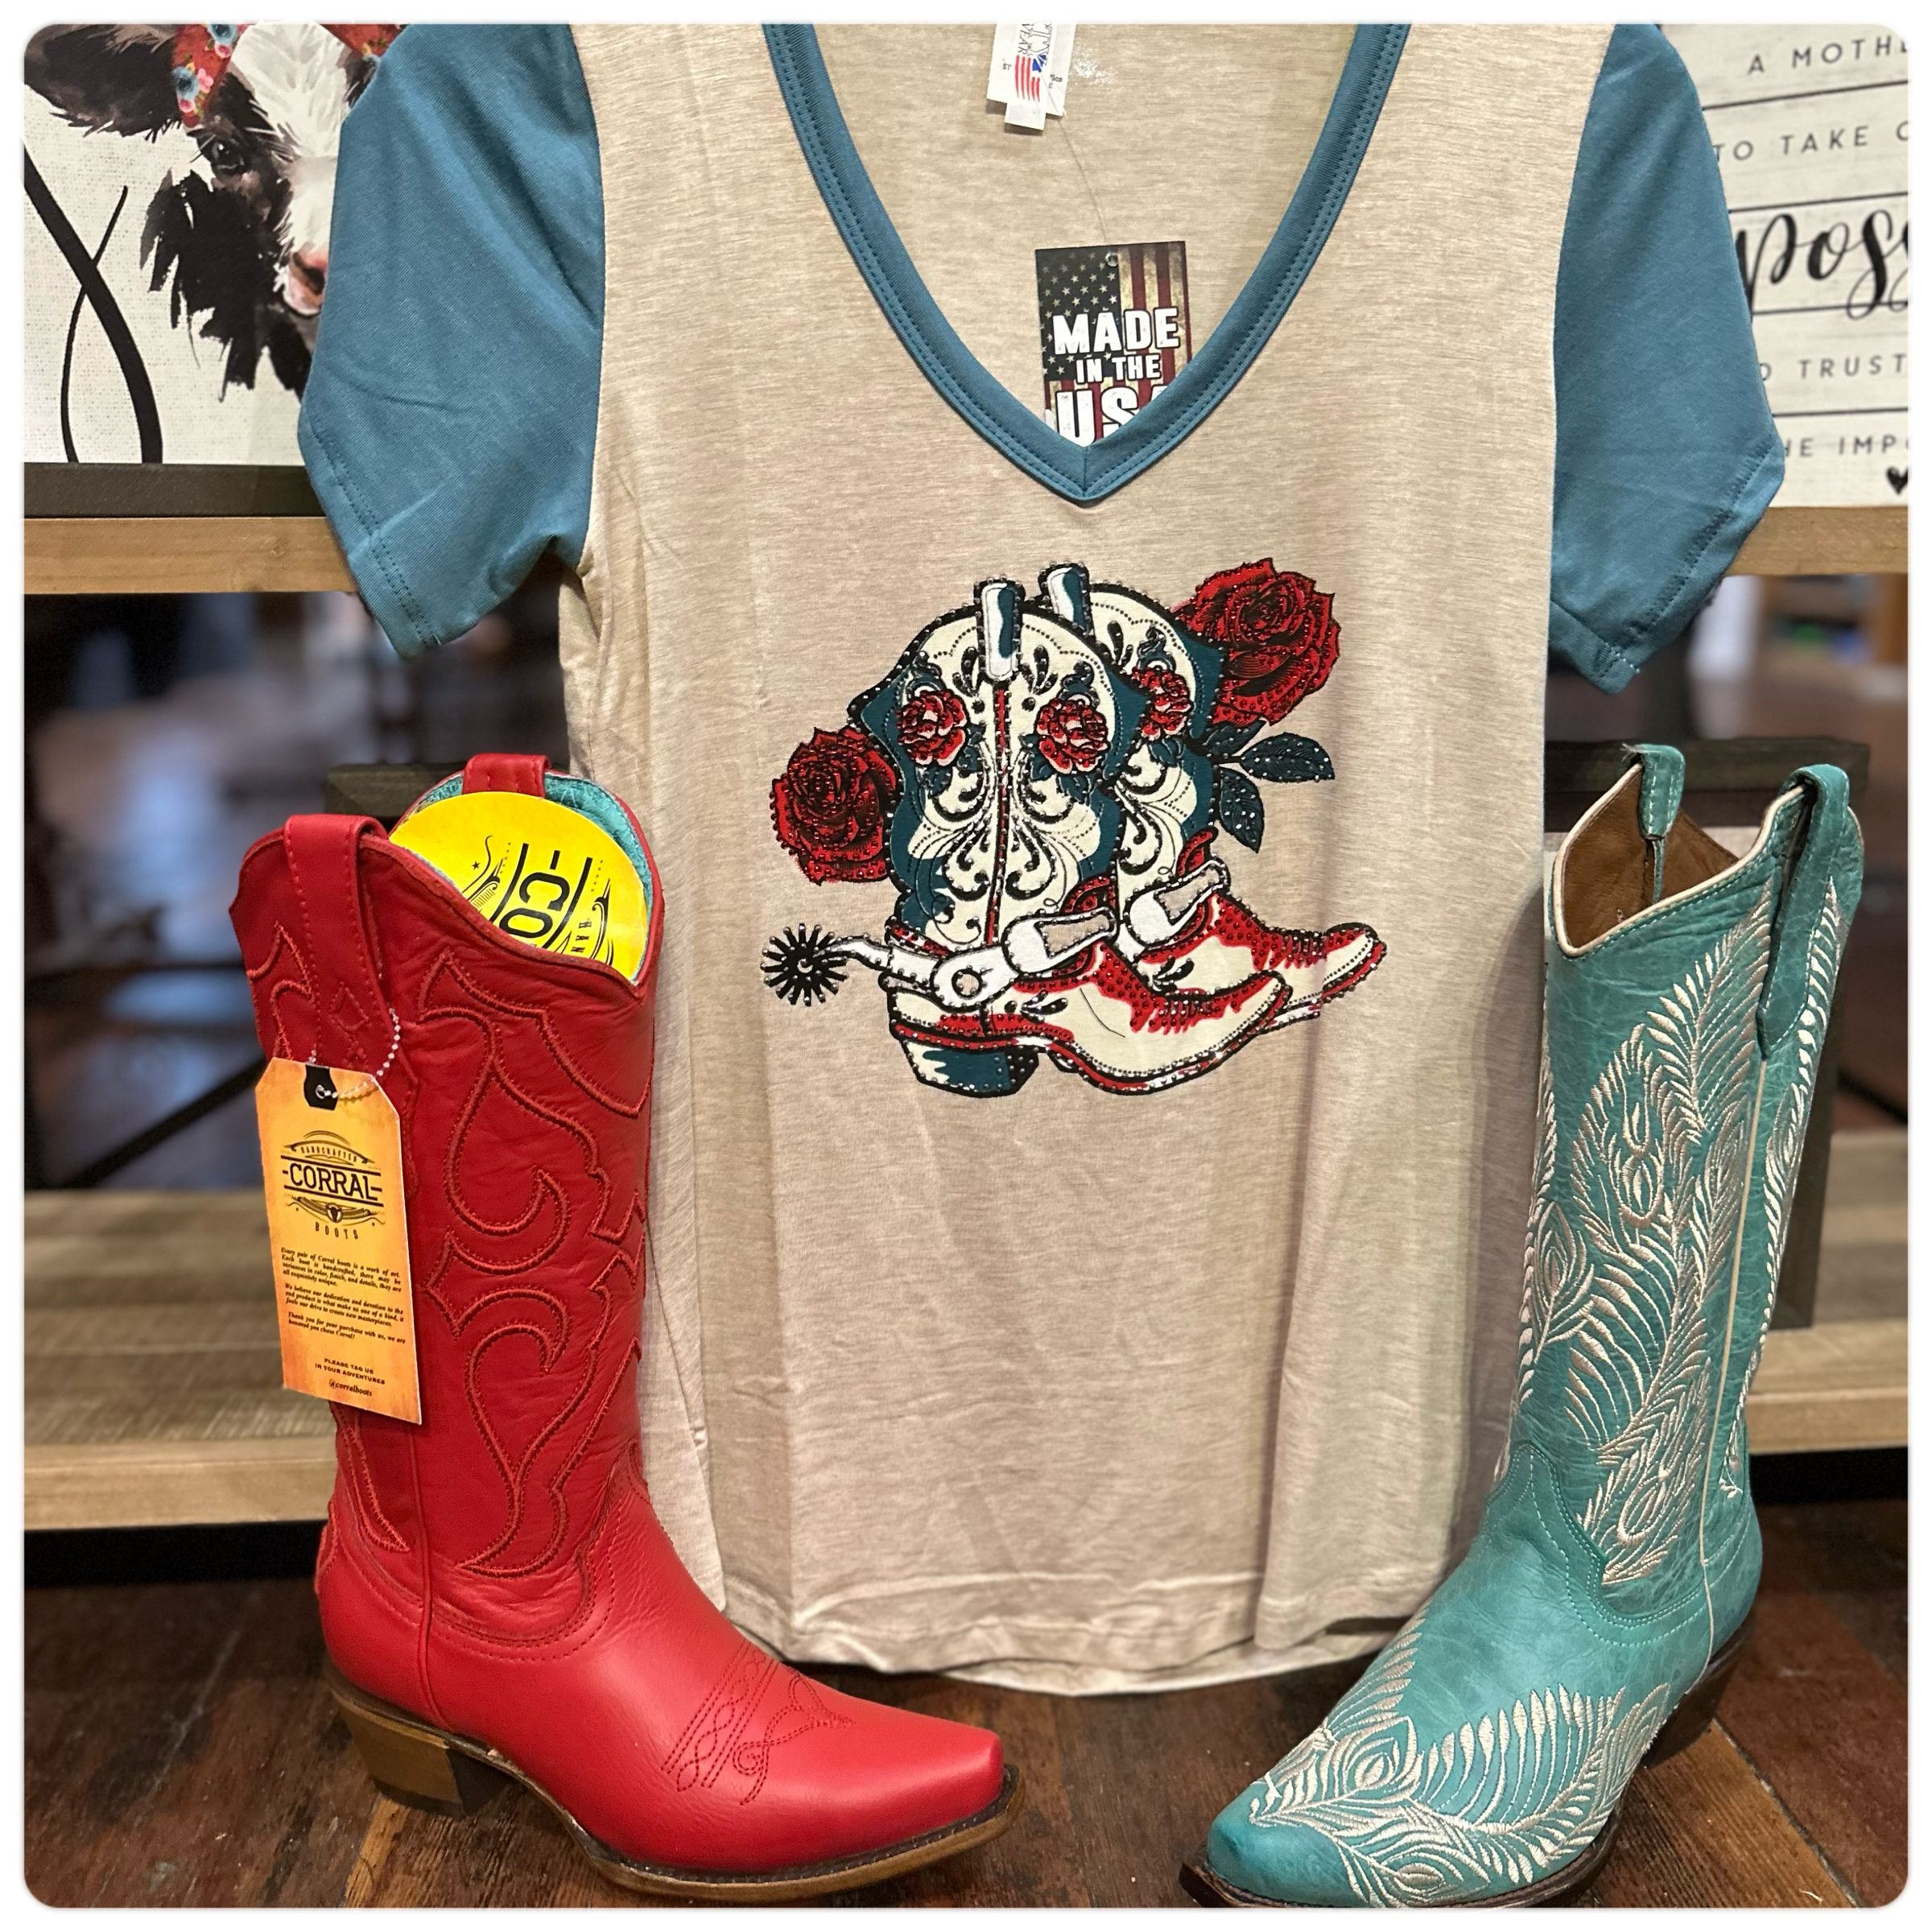 Boots & Roses Short Sleeve Tee-top-Liberty Wear-Gallop 'n Glitz- Women's Western Wear Boutique, Located in Grants Pass, Oregon